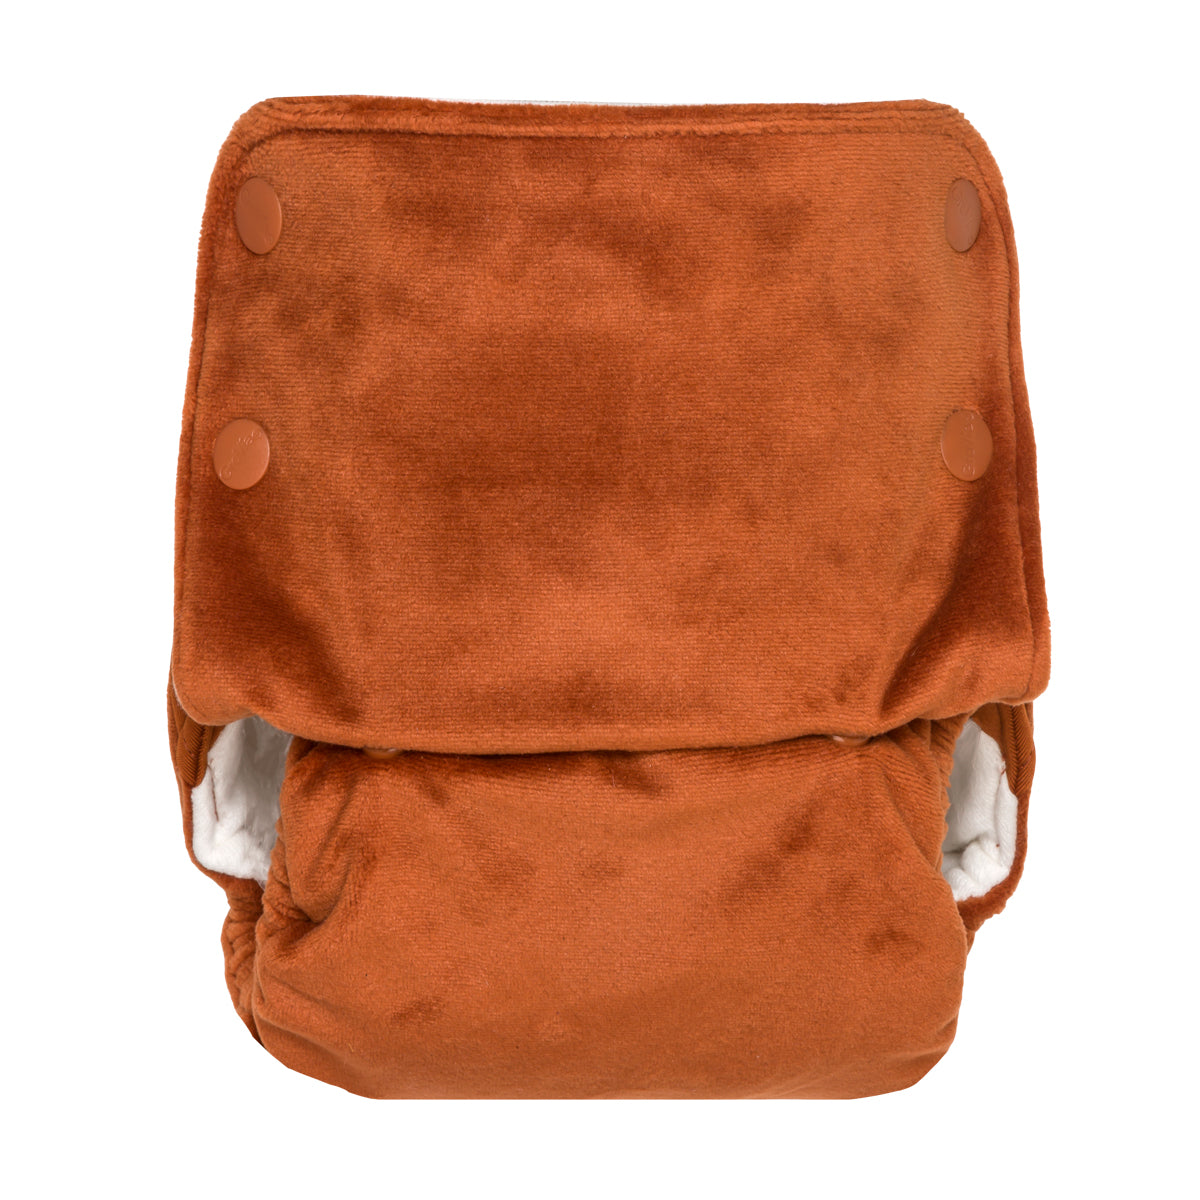 Buttah Grovia Spice Burnt Orange One Size All-In-One Reusable Cloth Nappy